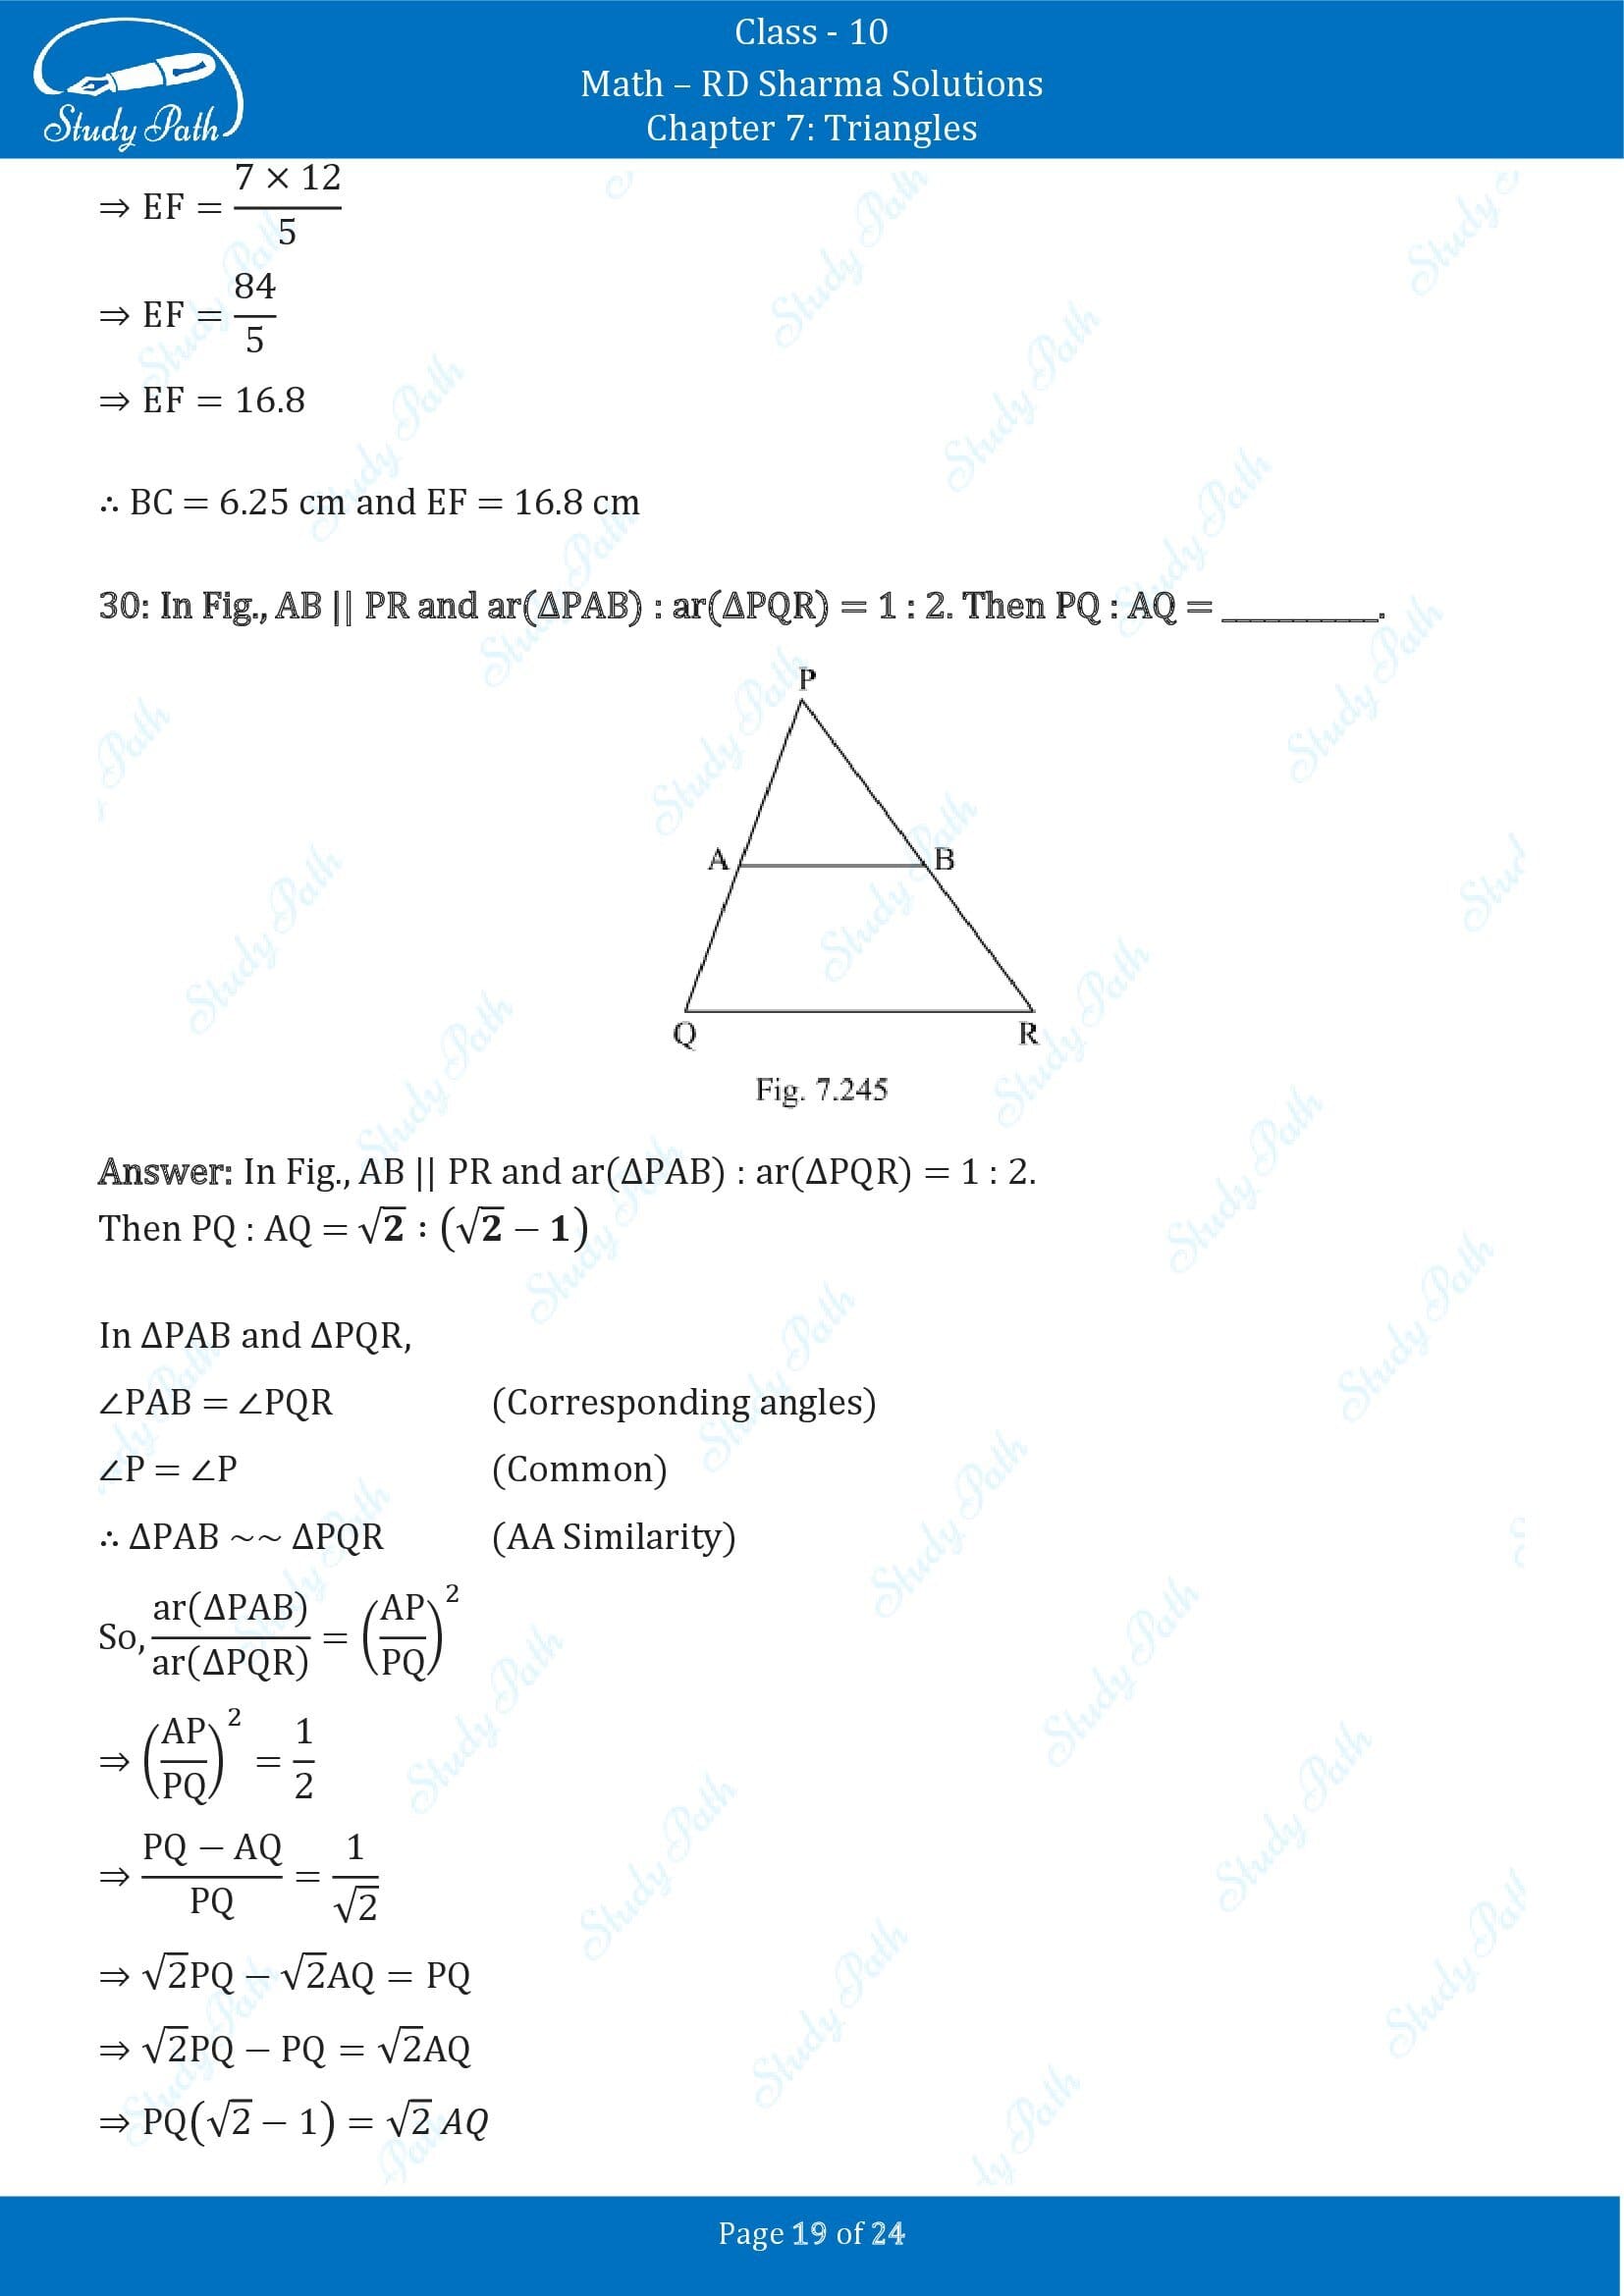 RD Sharma Solutions Class 10 Chapter 7 Triangles Fill in the Blank Type Questions FBQs 00019